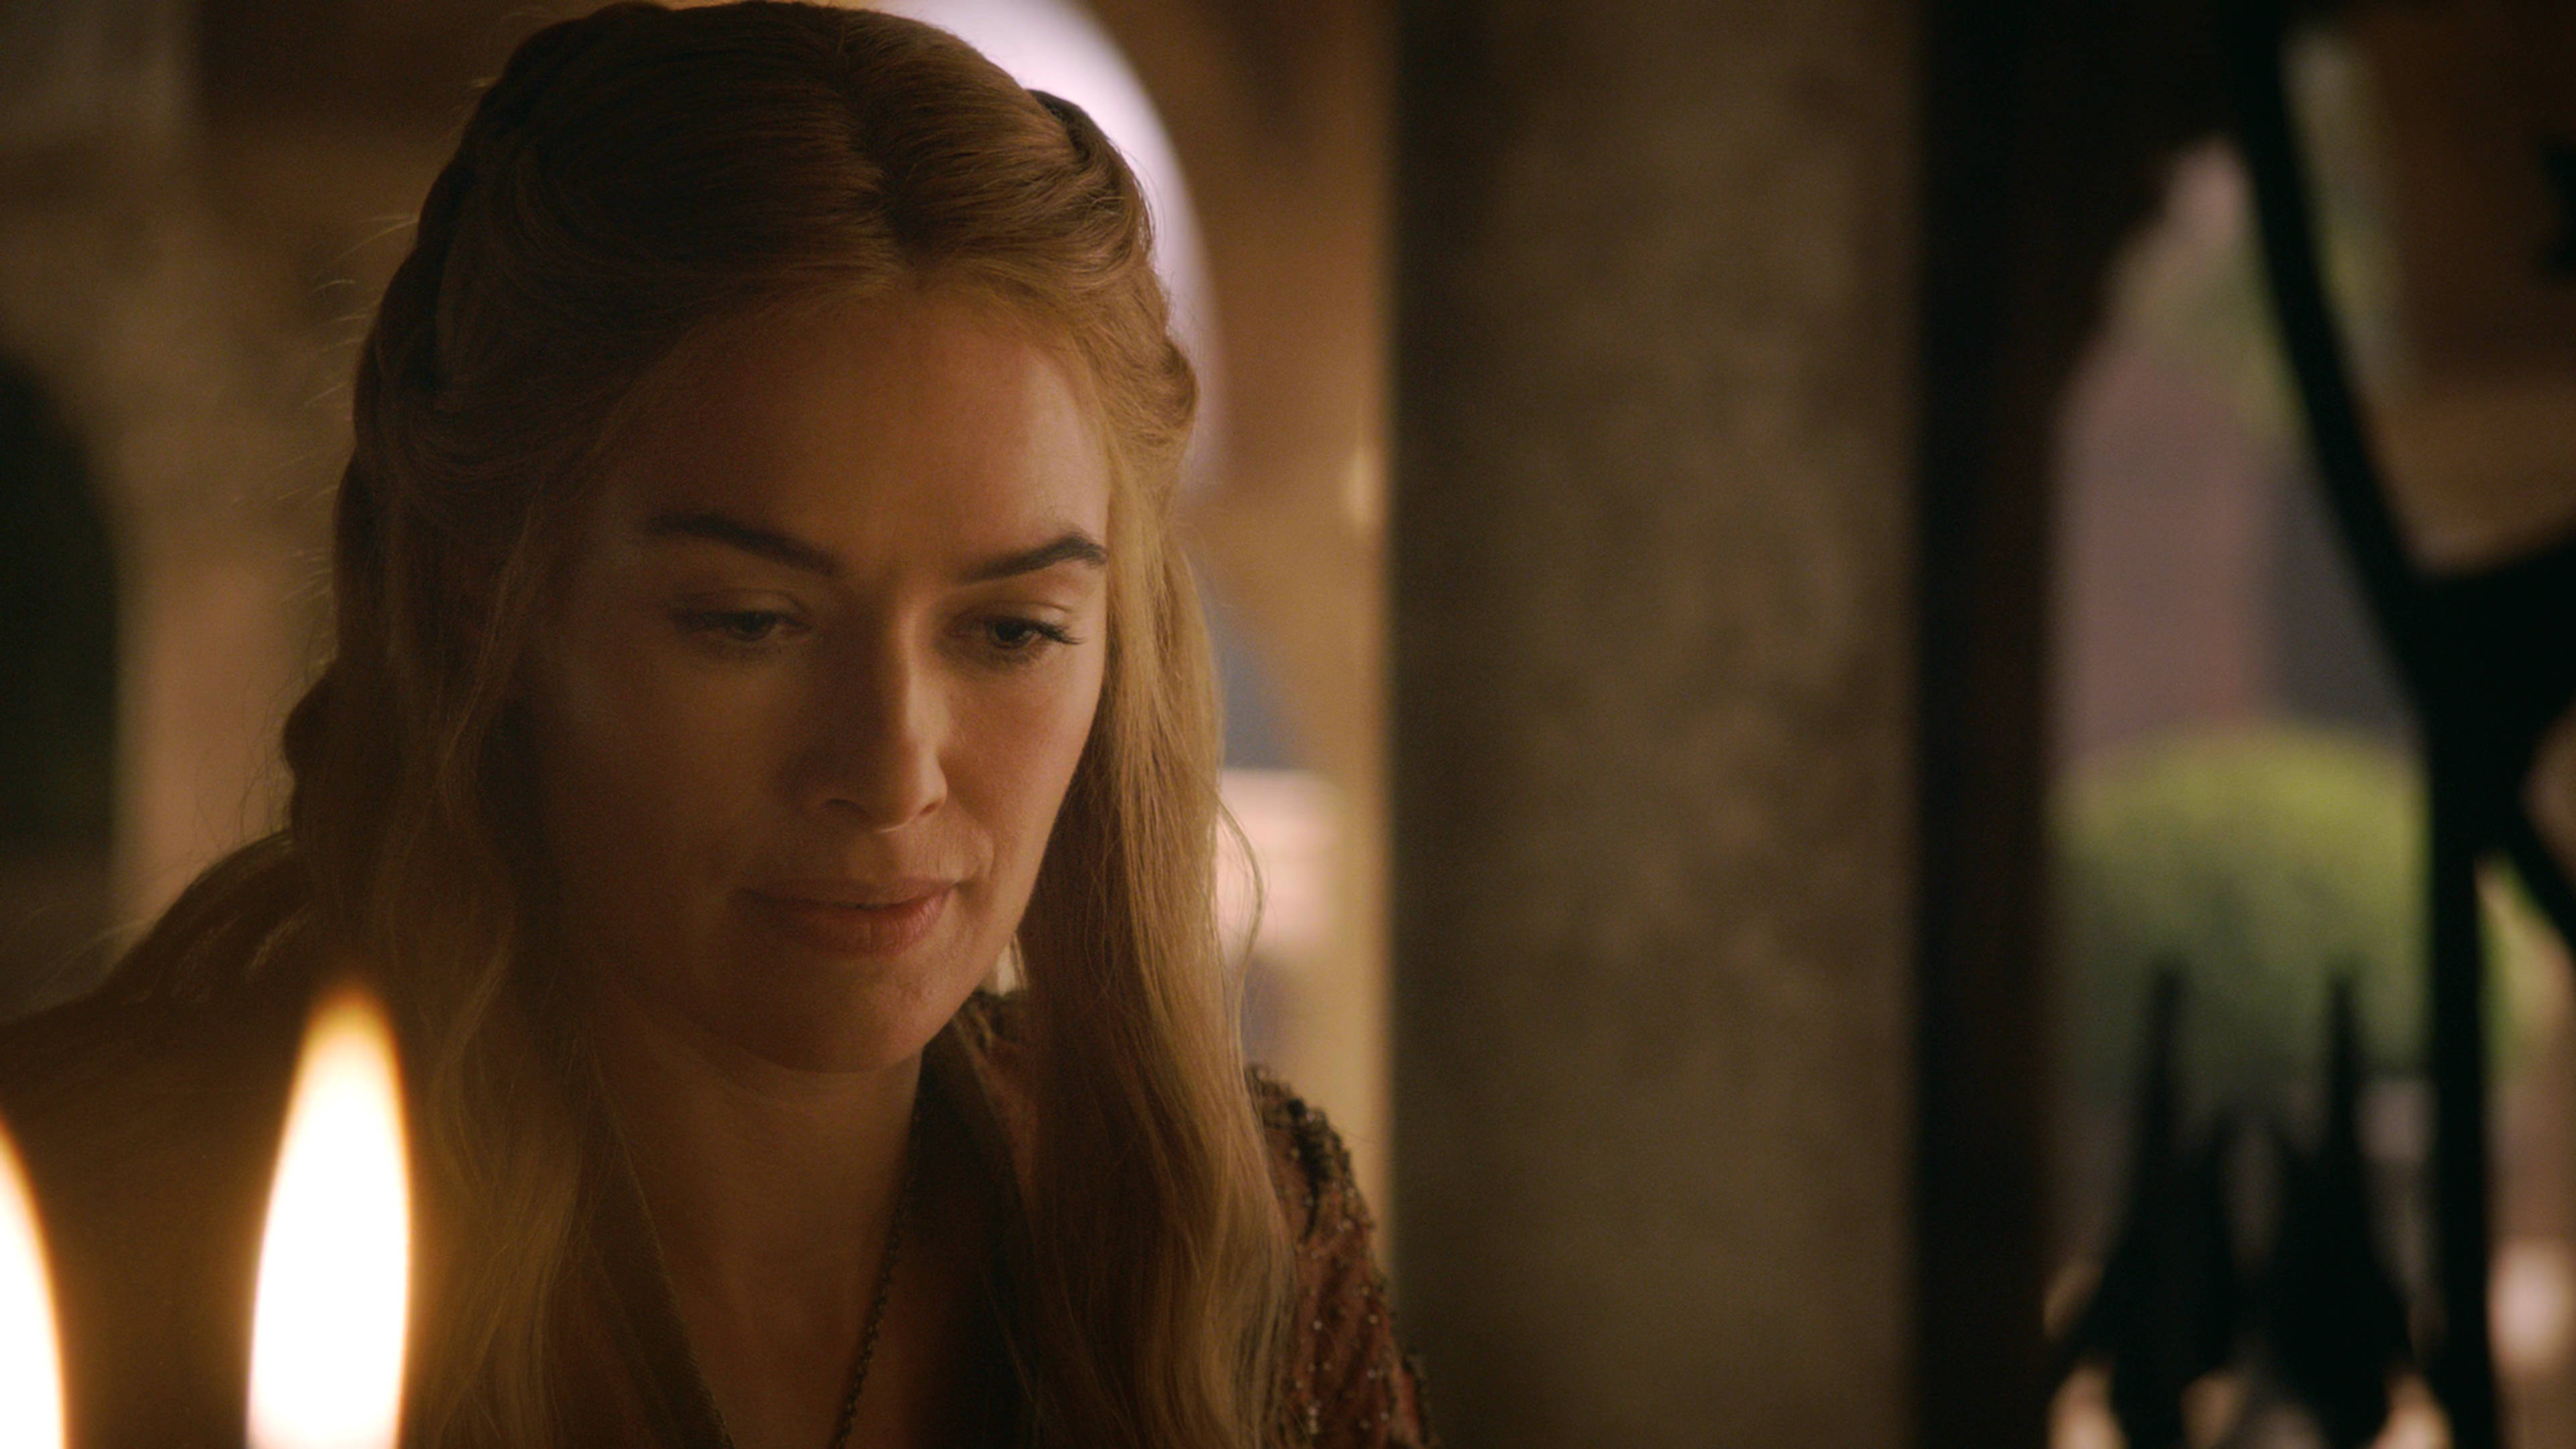 extant_GameOfThrones_3x04-AndNowHisWatchIsEnded_2668.jpg